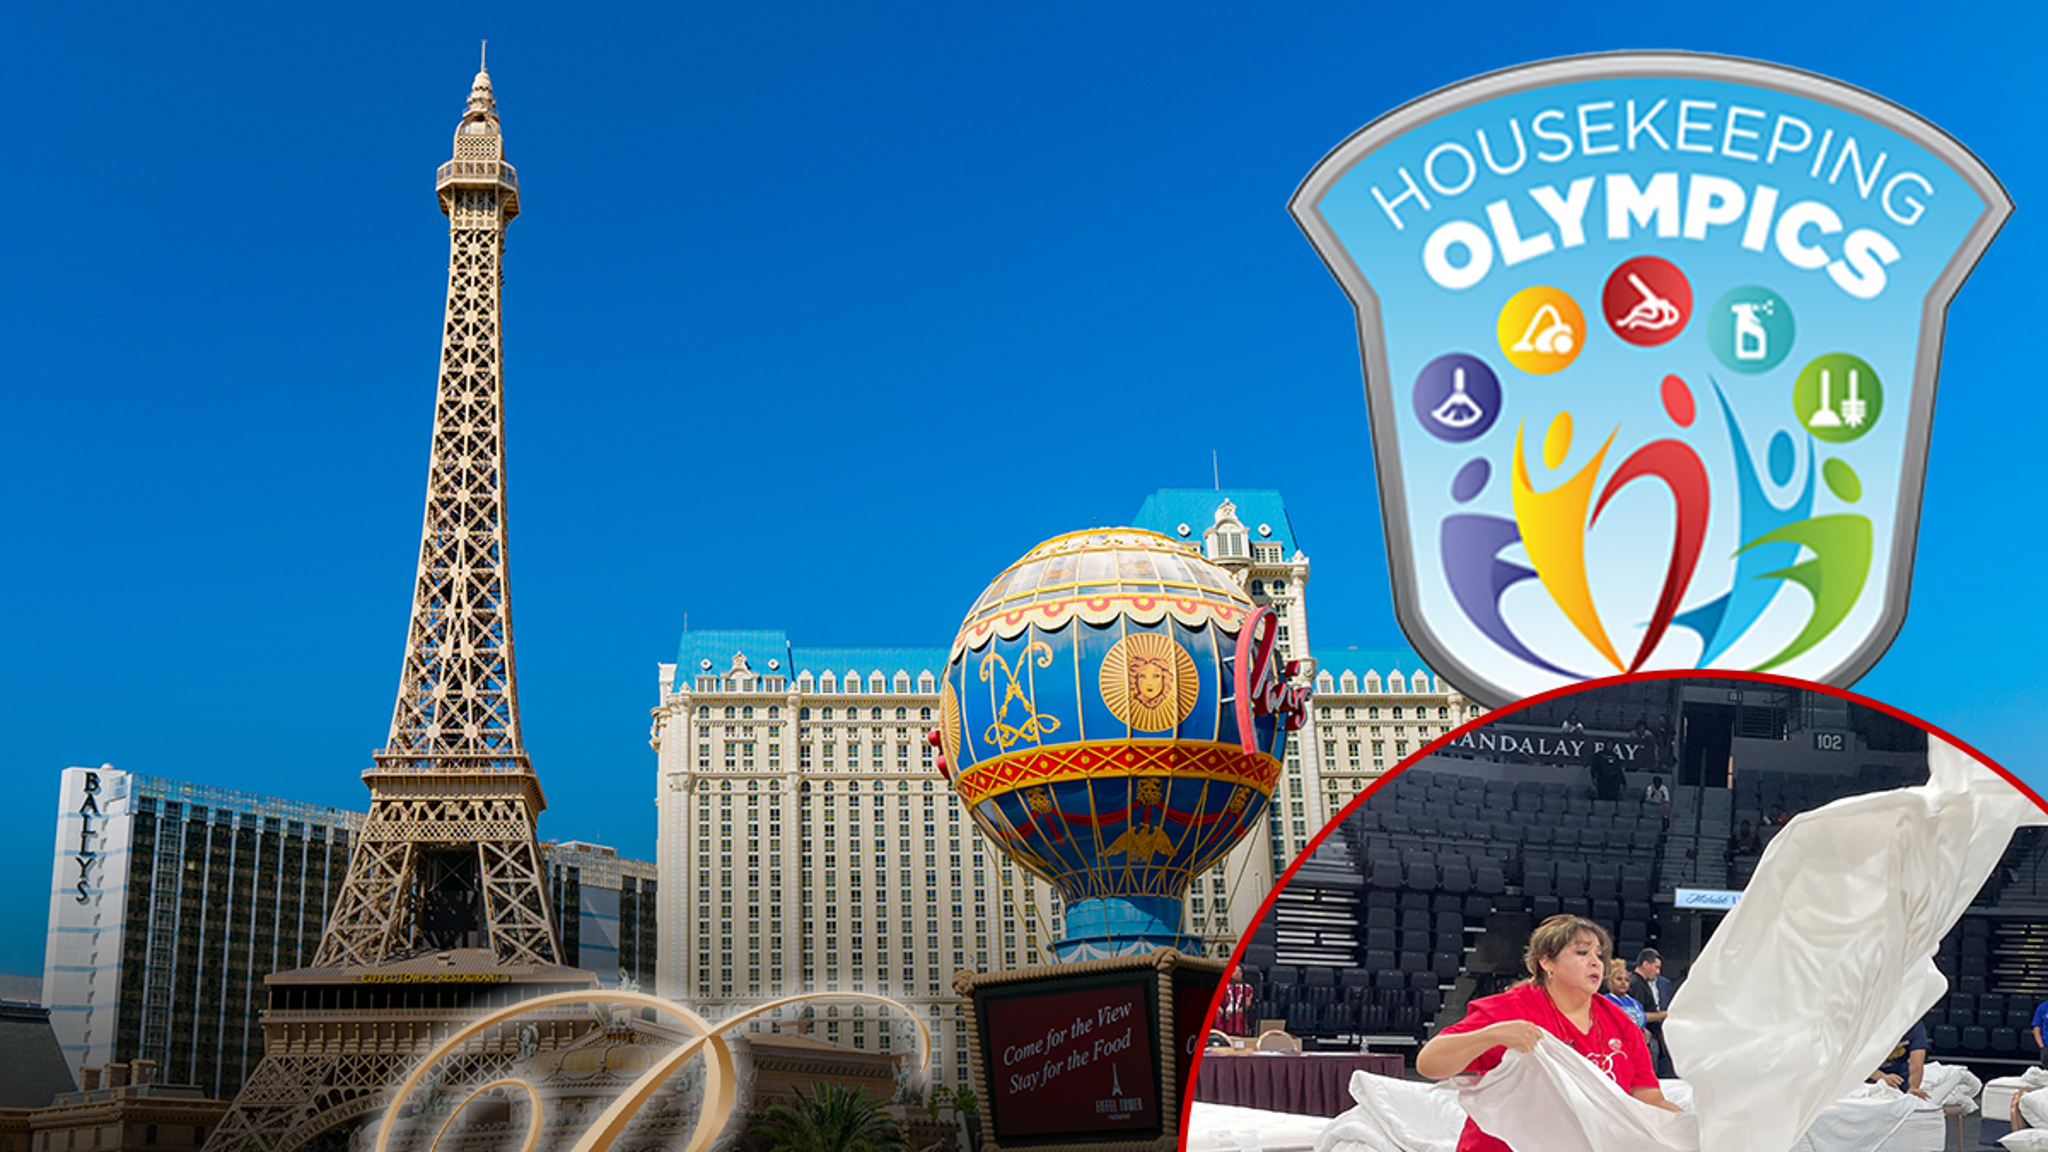 Vegas Hospitality Workers Compete in Housekeeping Olympics